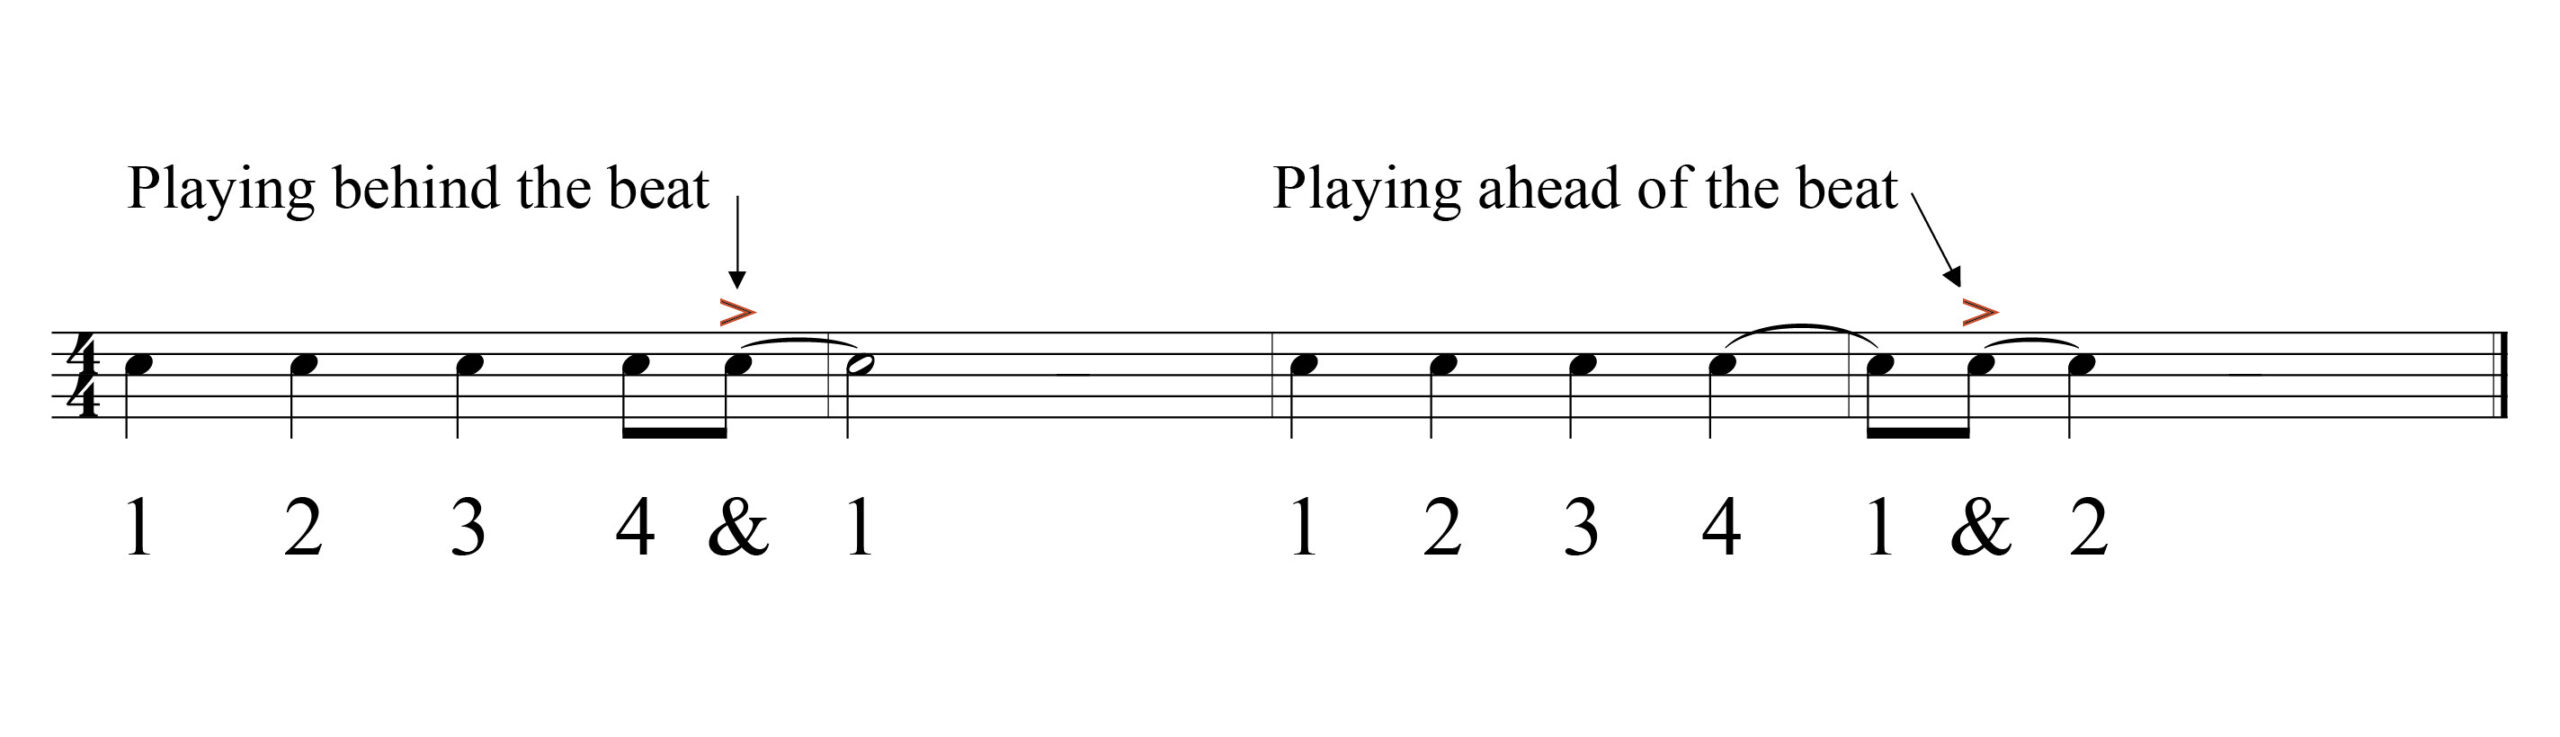 Top 10 Tips Rhythm-syncopation-pushed notes